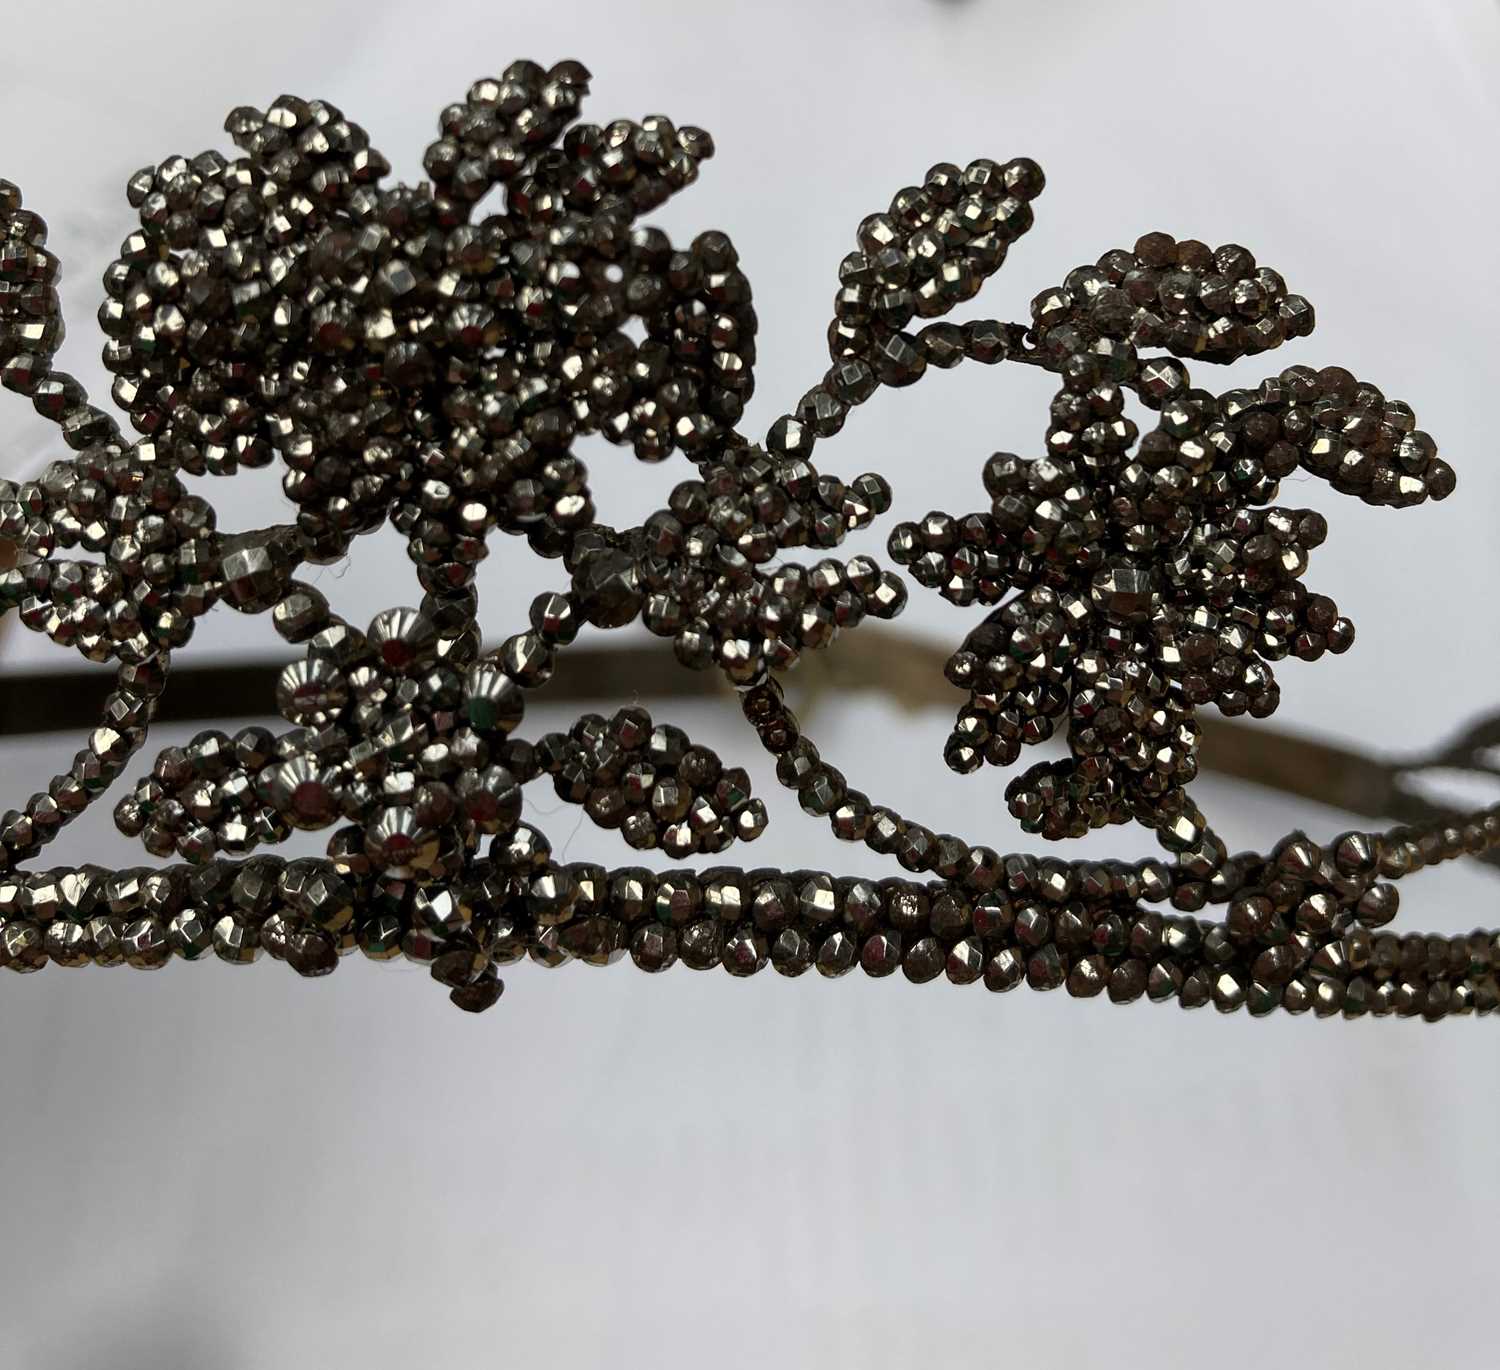 19th Century and Later Cut Steel Jewellery, comprising a decorative tiara with rotating flower heads - Image 18 of 19